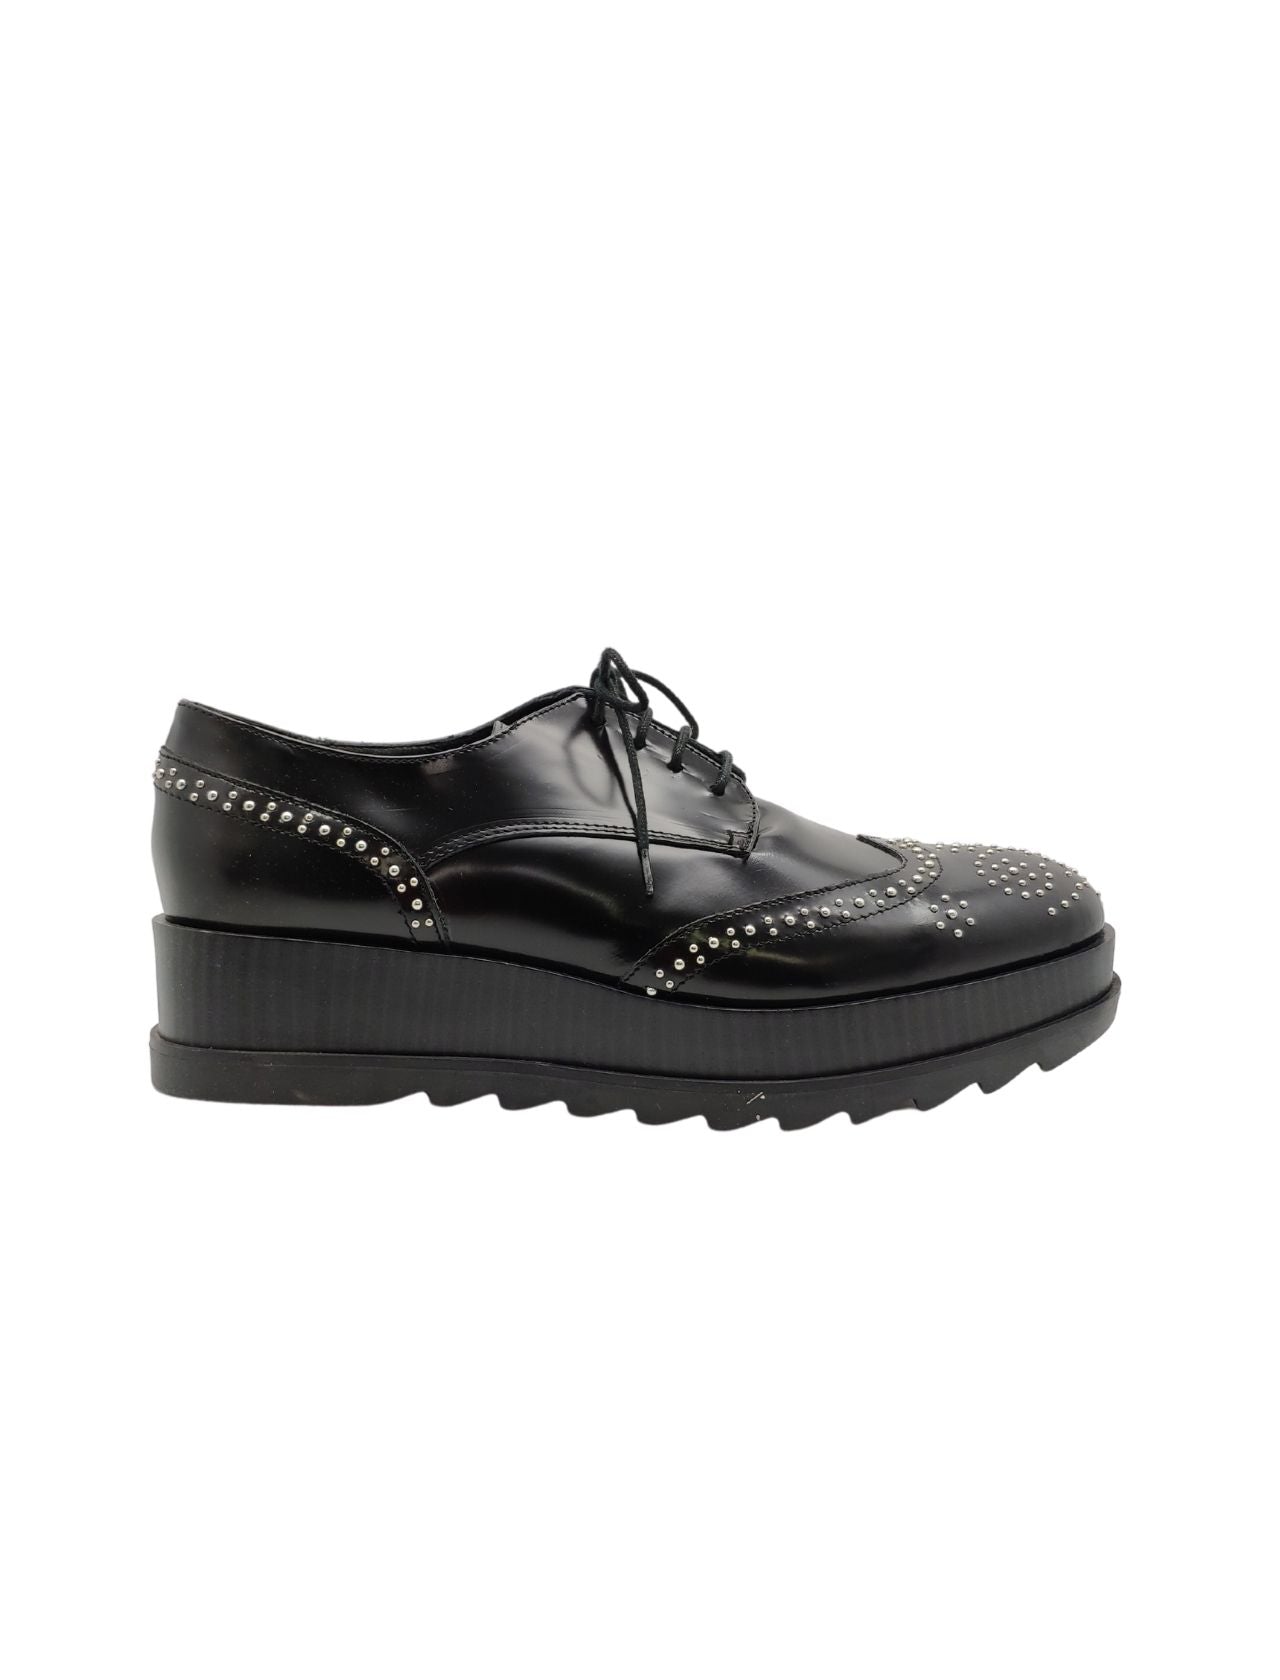 Women's lace-up shoes in black leather with studs and wedge